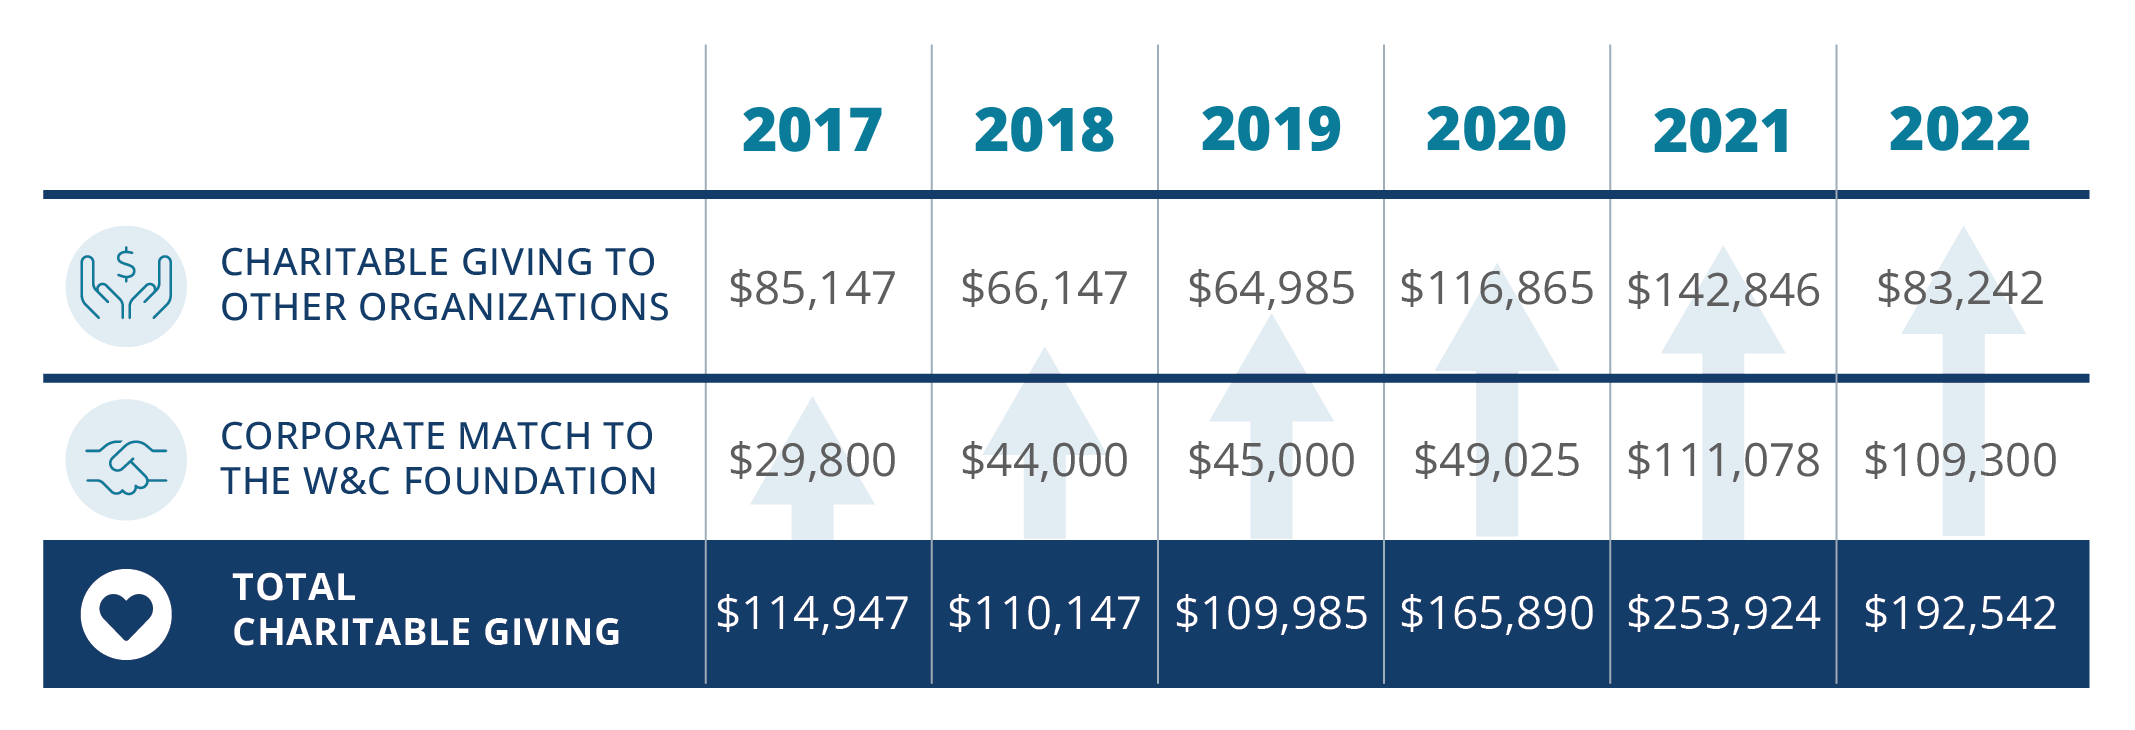 Chart of Woodard & Curran's charitable giving from 2017 through 2022